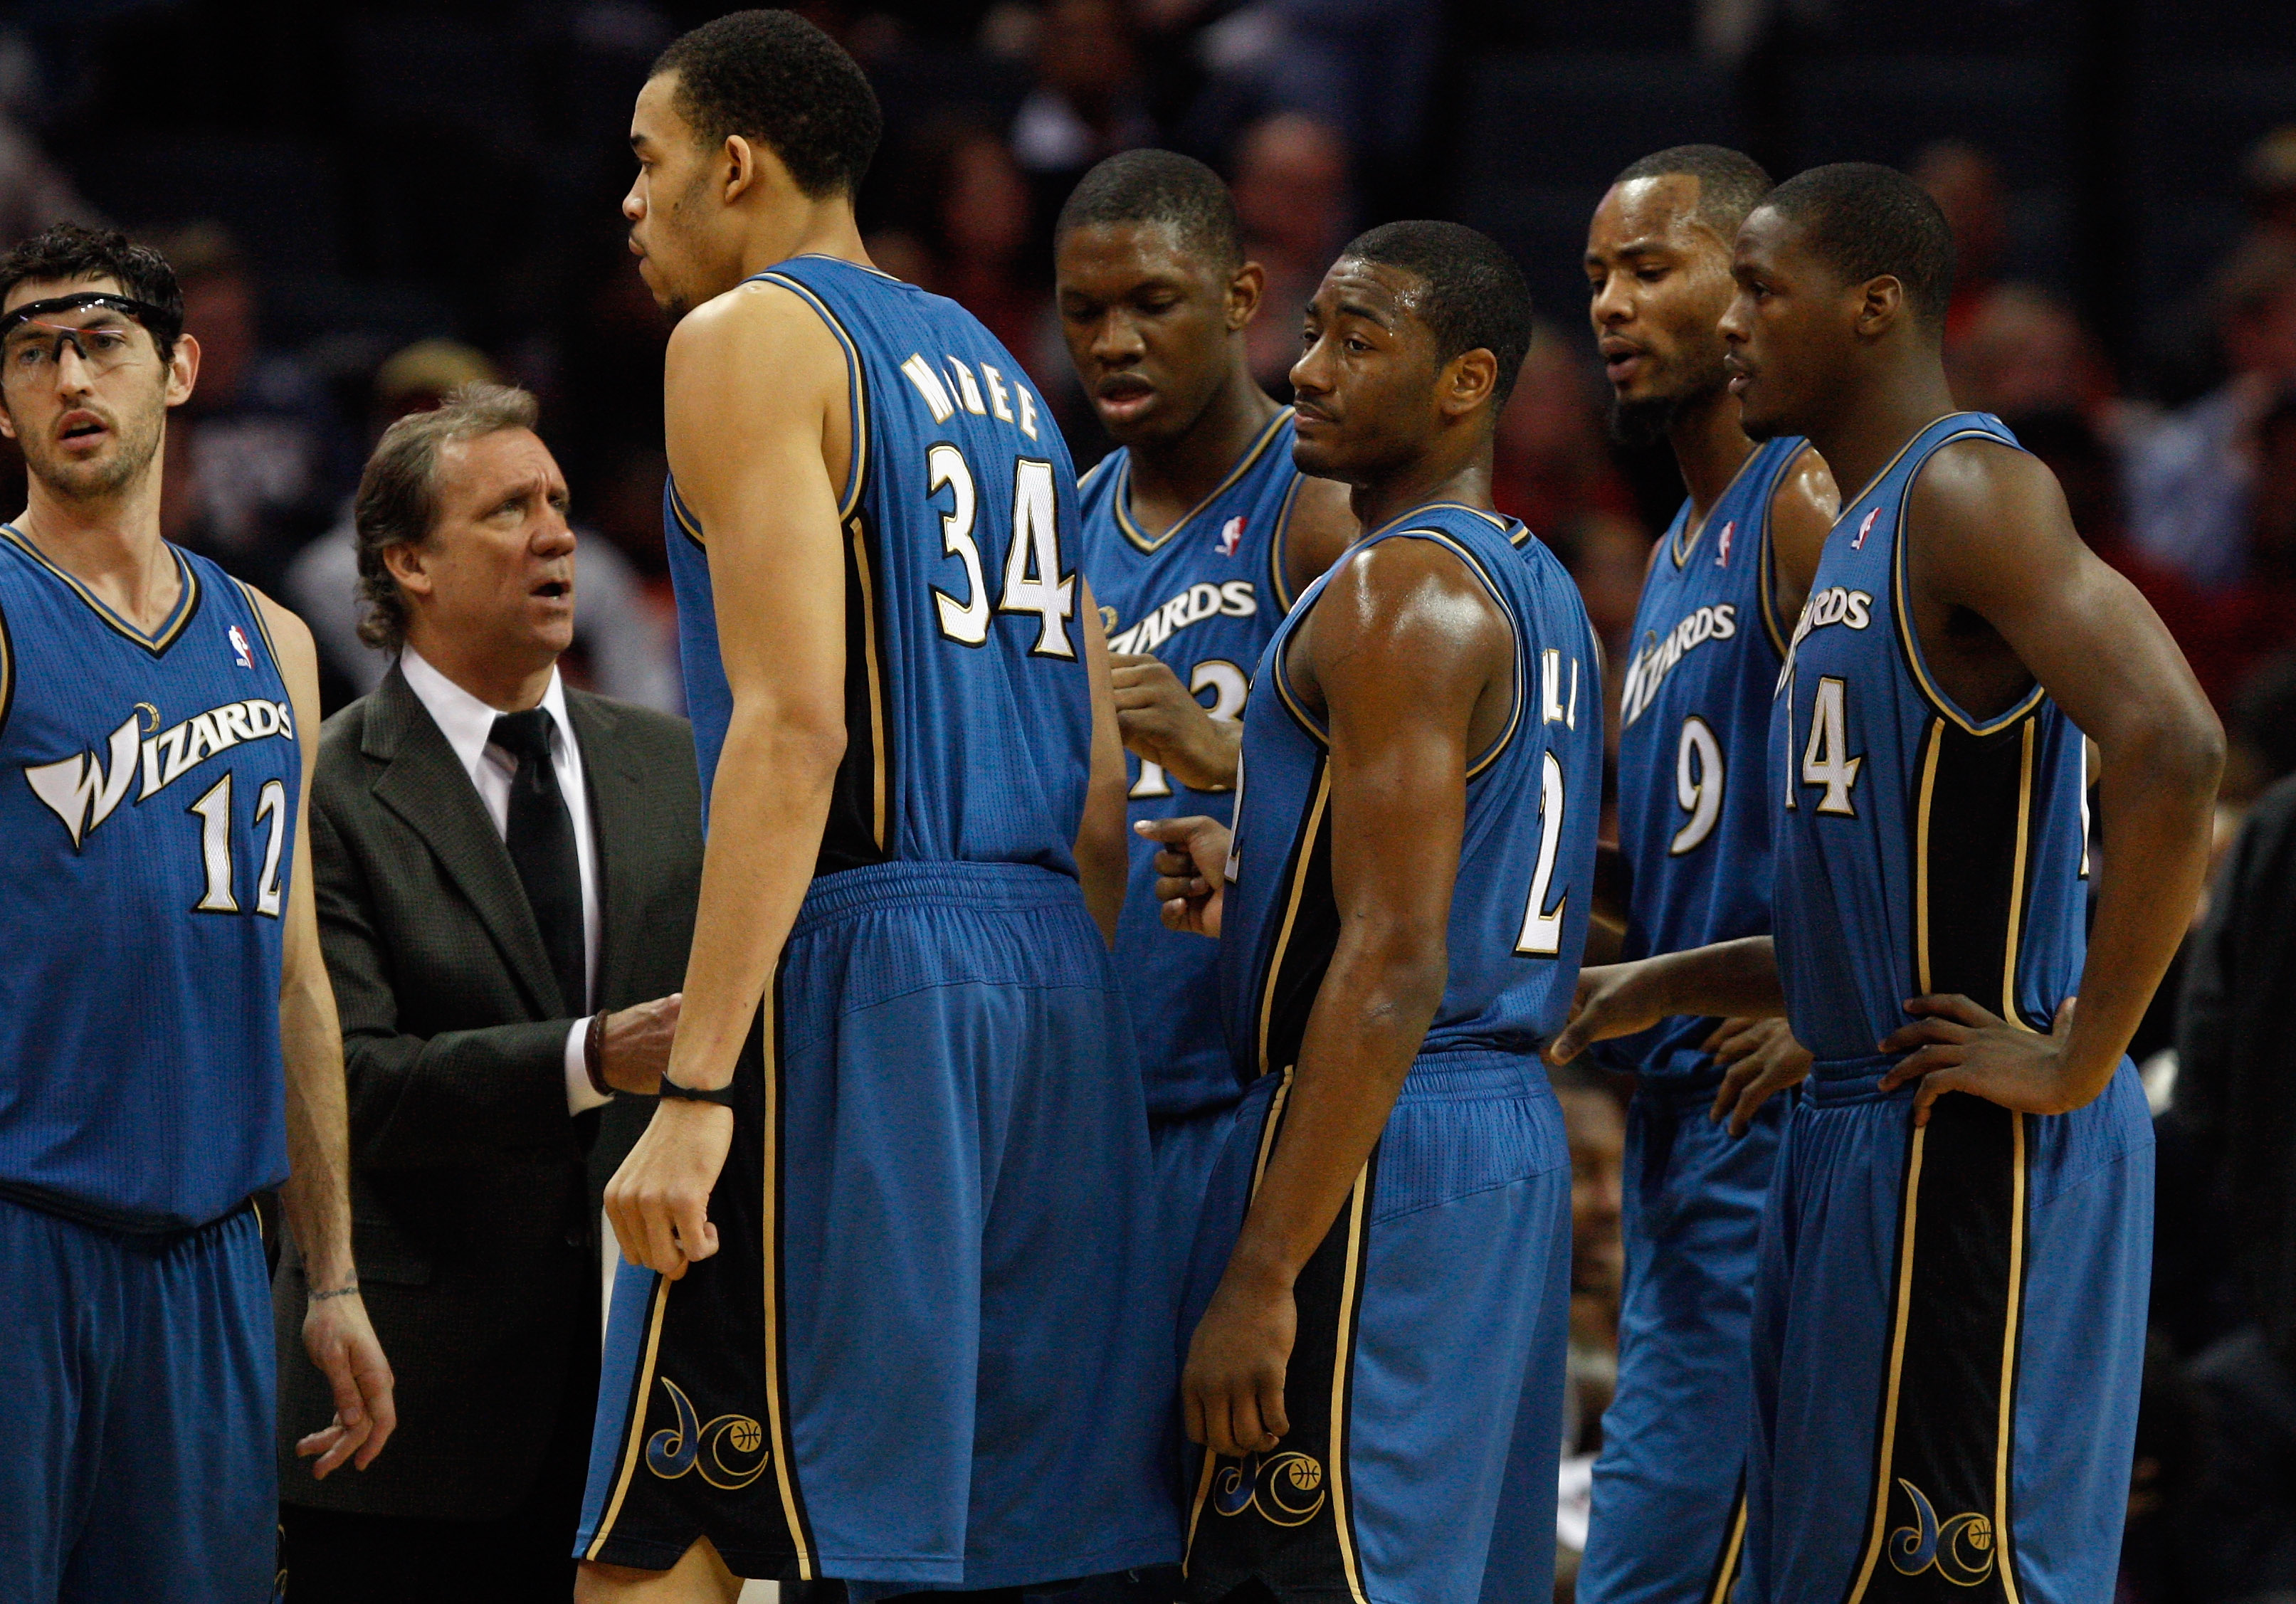 CHARLOTTE, NC - JANUARY 08:  Head coach Flip Saunders of the Washington Wizards talks to his team on the sidelines during their game agains the Charlotte Bobcats at Time Warner Cable Arena on January 8, 2011 in Charlotte, North Carolina. NOTE TO USER: Use